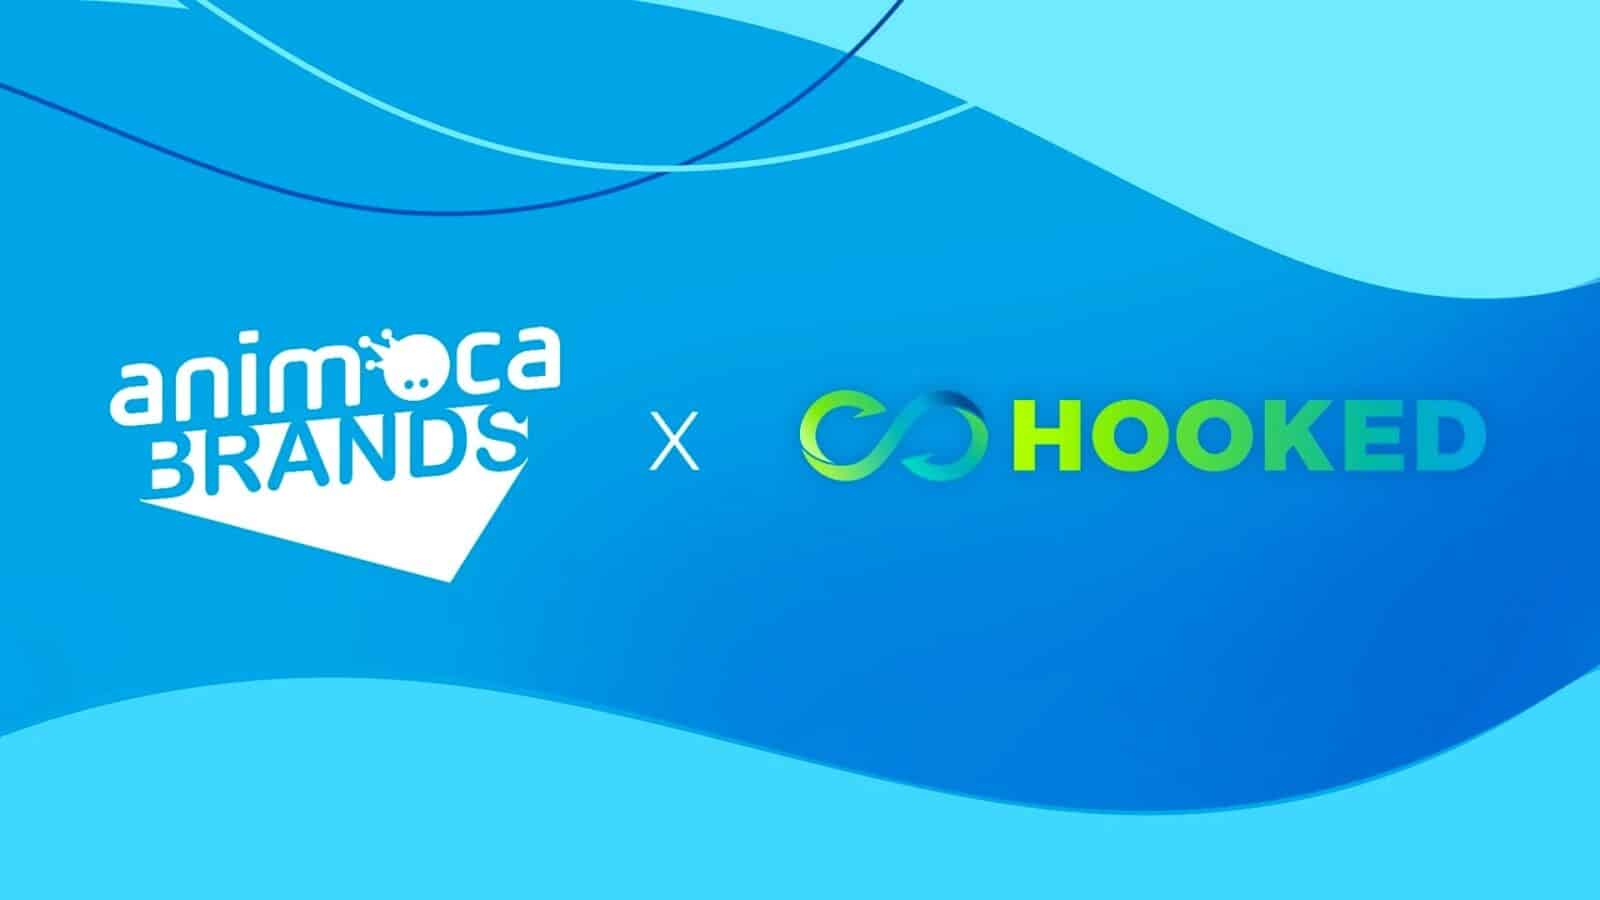 animoca brands and hooked protocol partner to promote web3 edutainment adoption Animoca Brands, a famous venture capital firm, has recently announced its strategic partnership with the gamified edutainment platform Hooked Protocol. This alliance aims to foster innovation in Web3 edutainment and expedite the adoption of Web3 technologies.